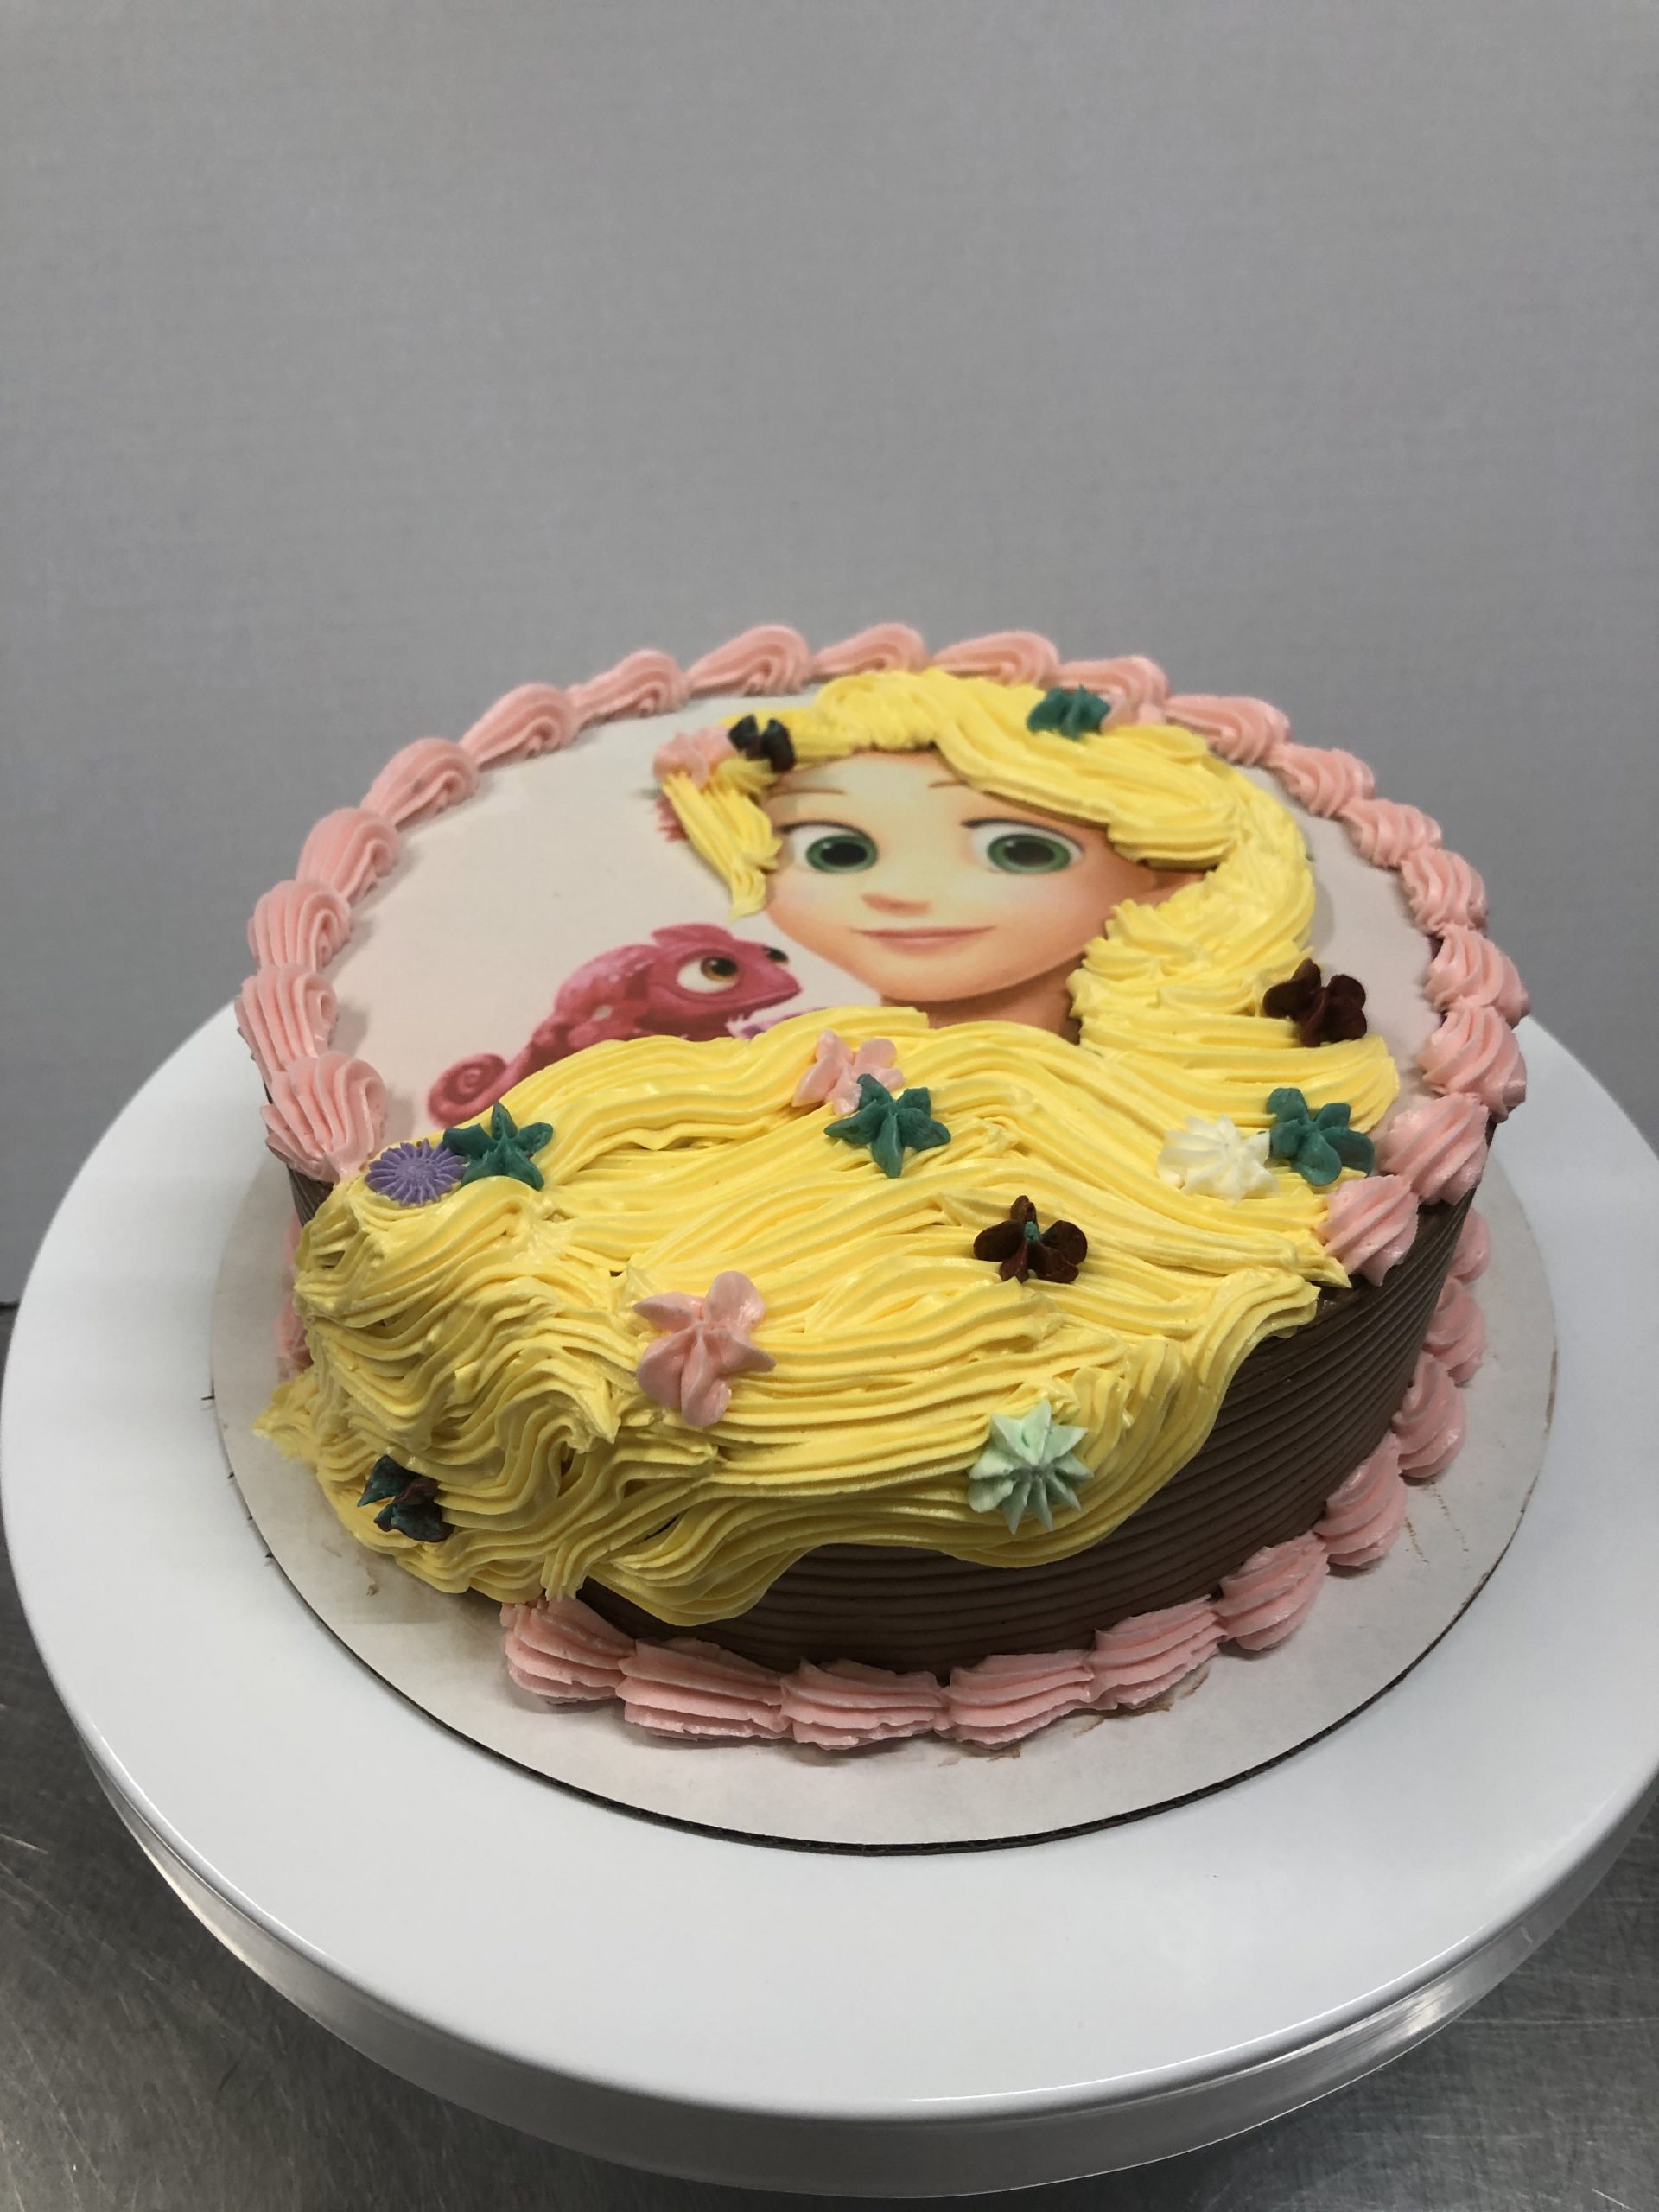 Ugly Cake with a Bee Decoration